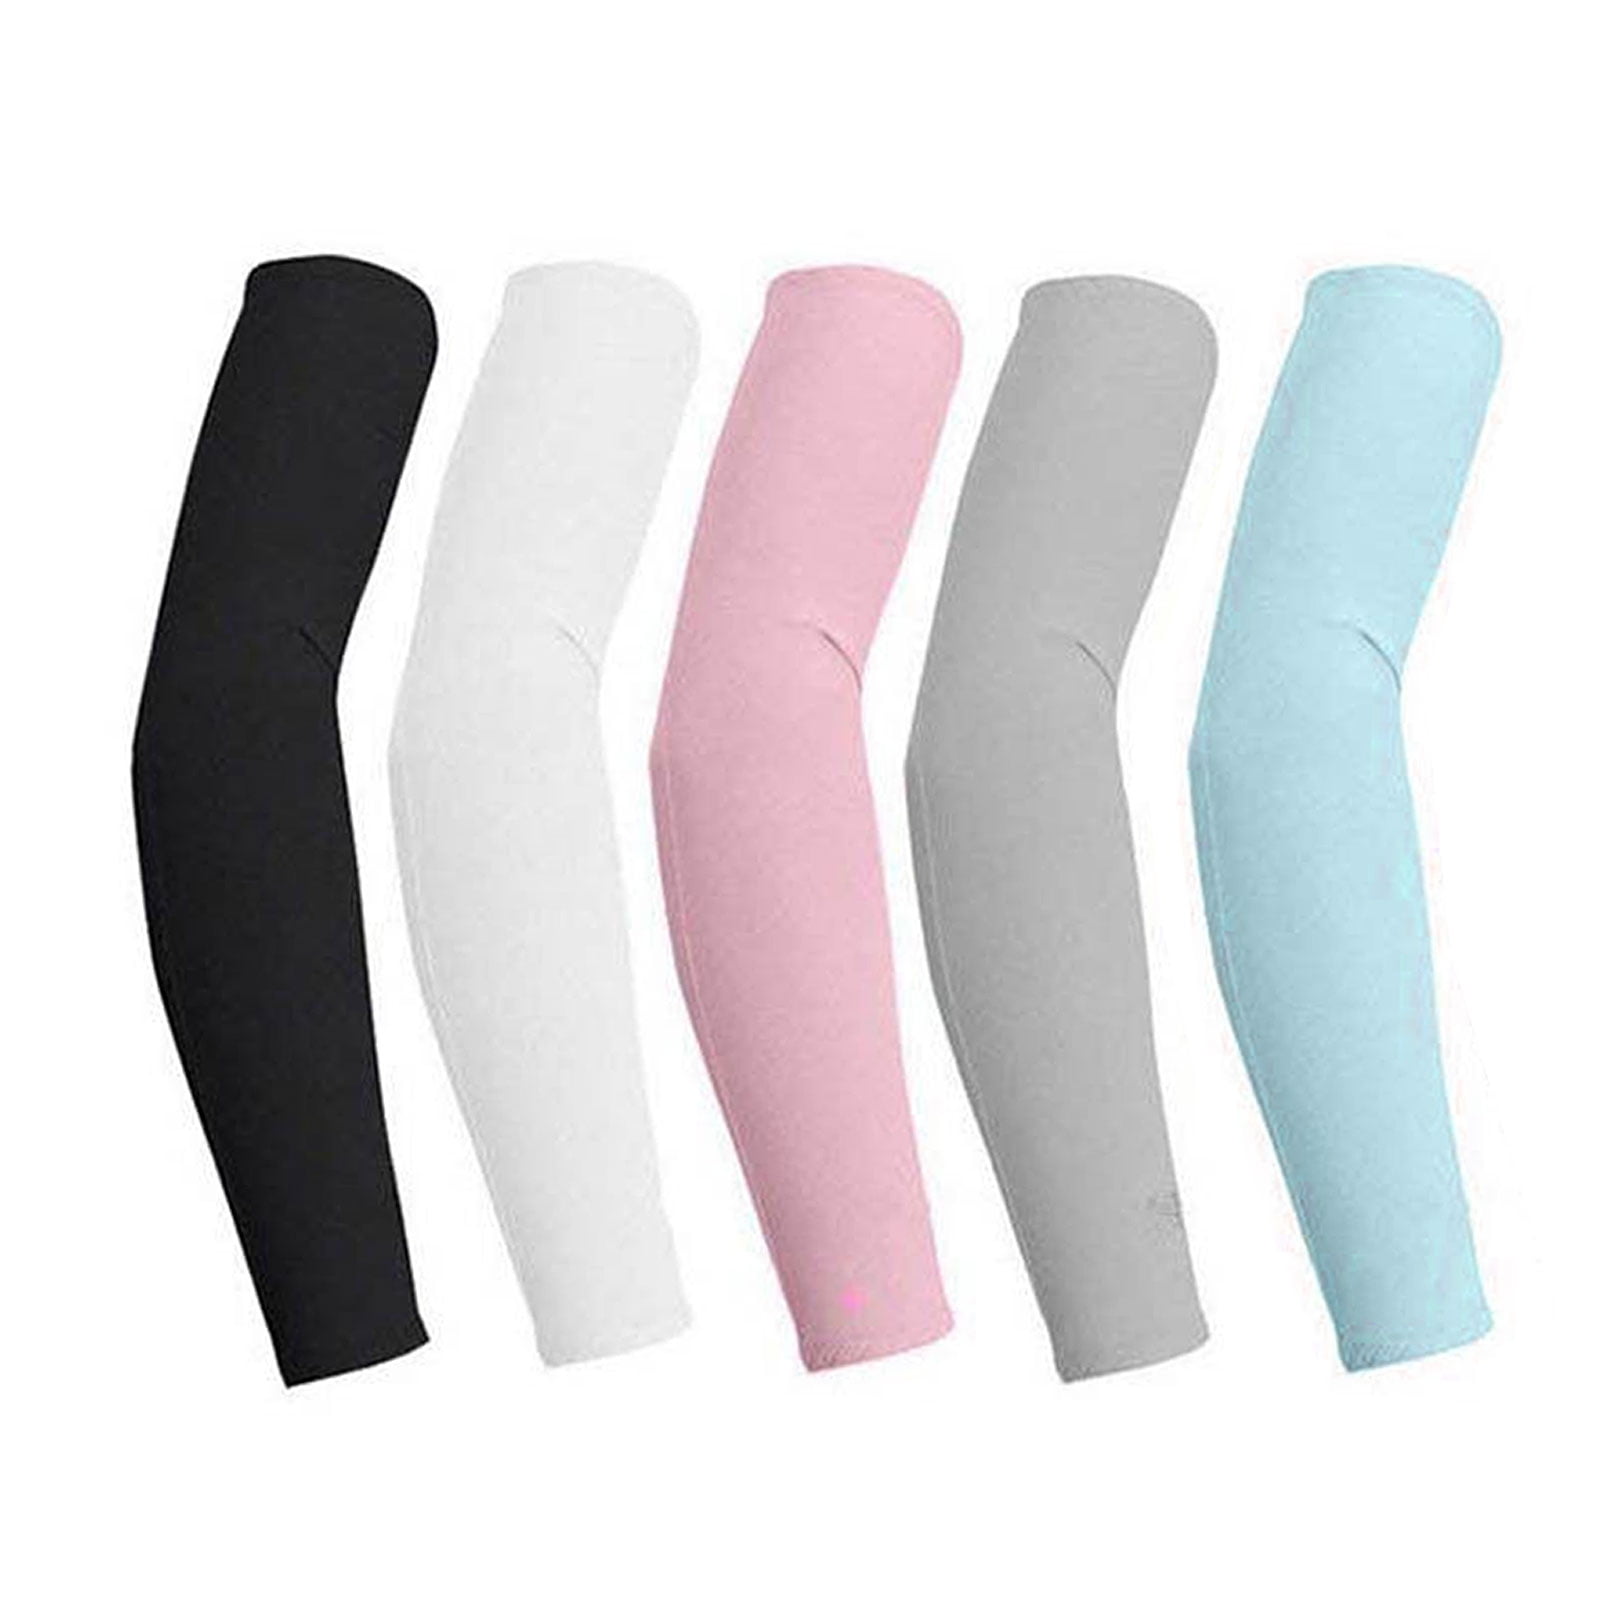 6 Pairs Cooling Arm Sleeves Cover UV Sun Protection Outdoor Sports men women 